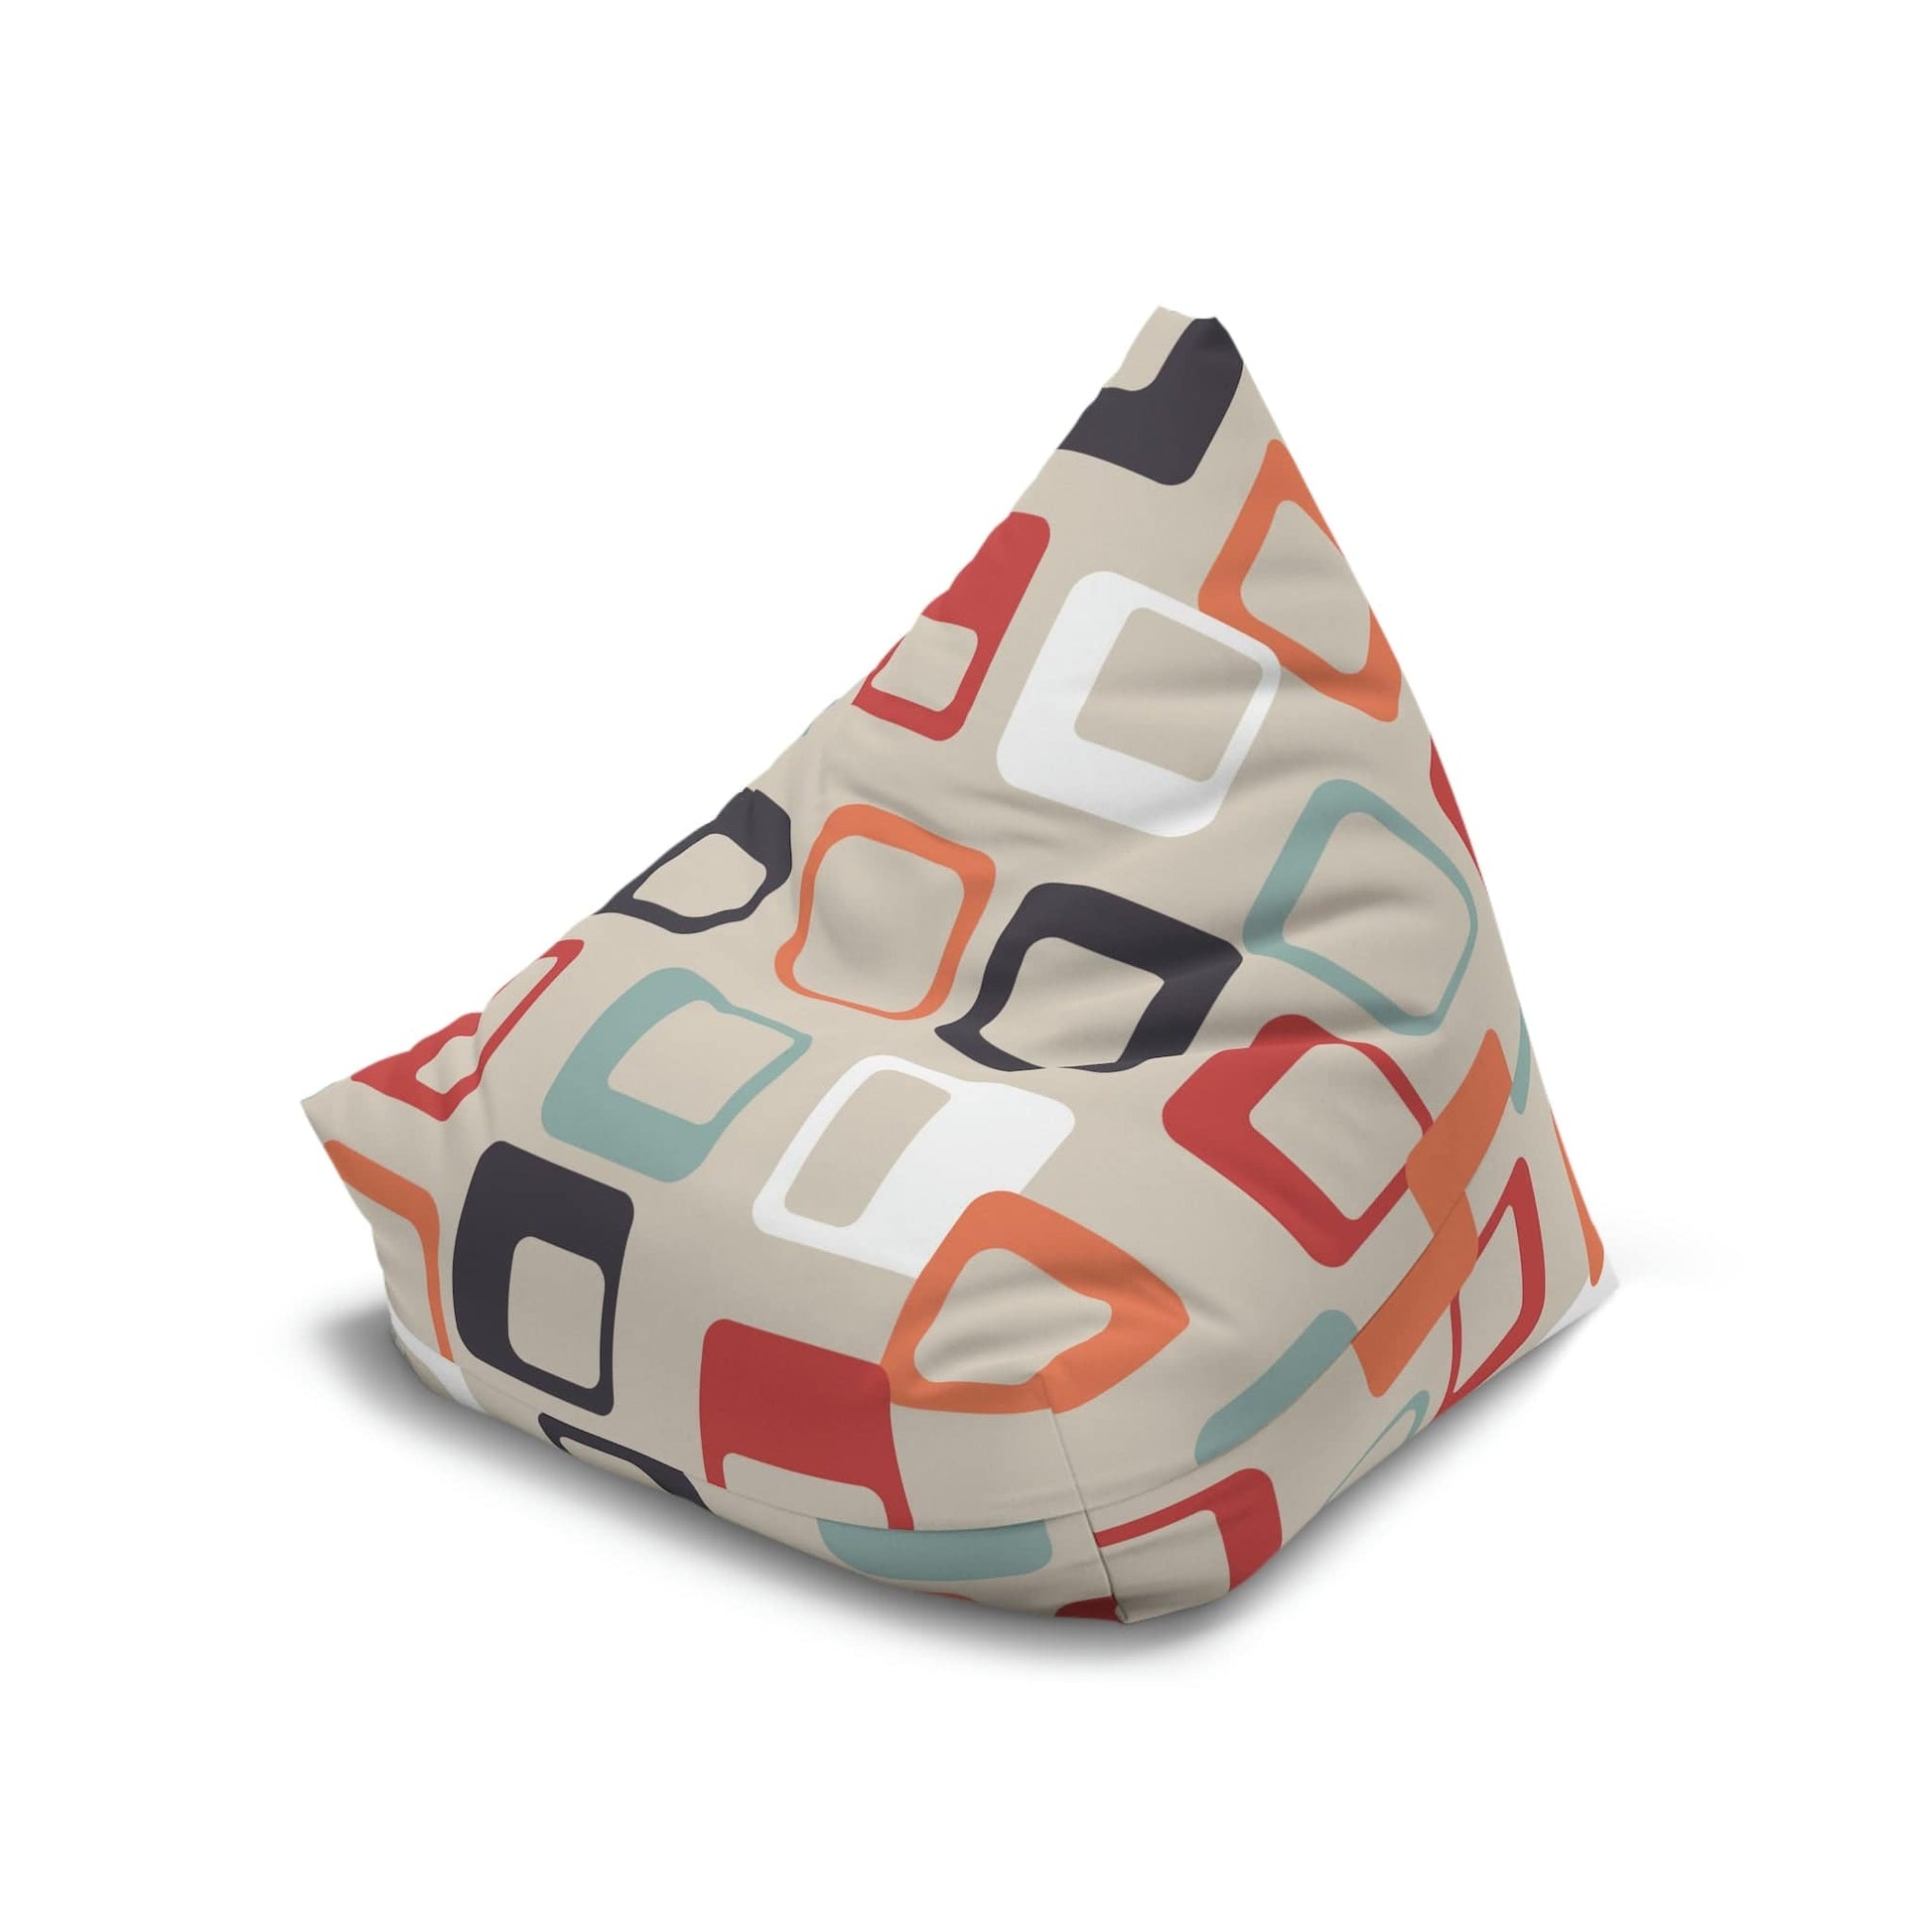 Kate McEnroe New York Retro Groovy Psychedelic Geometric Squares Bean Bag Chair Cover Bean Bag Chair Covers